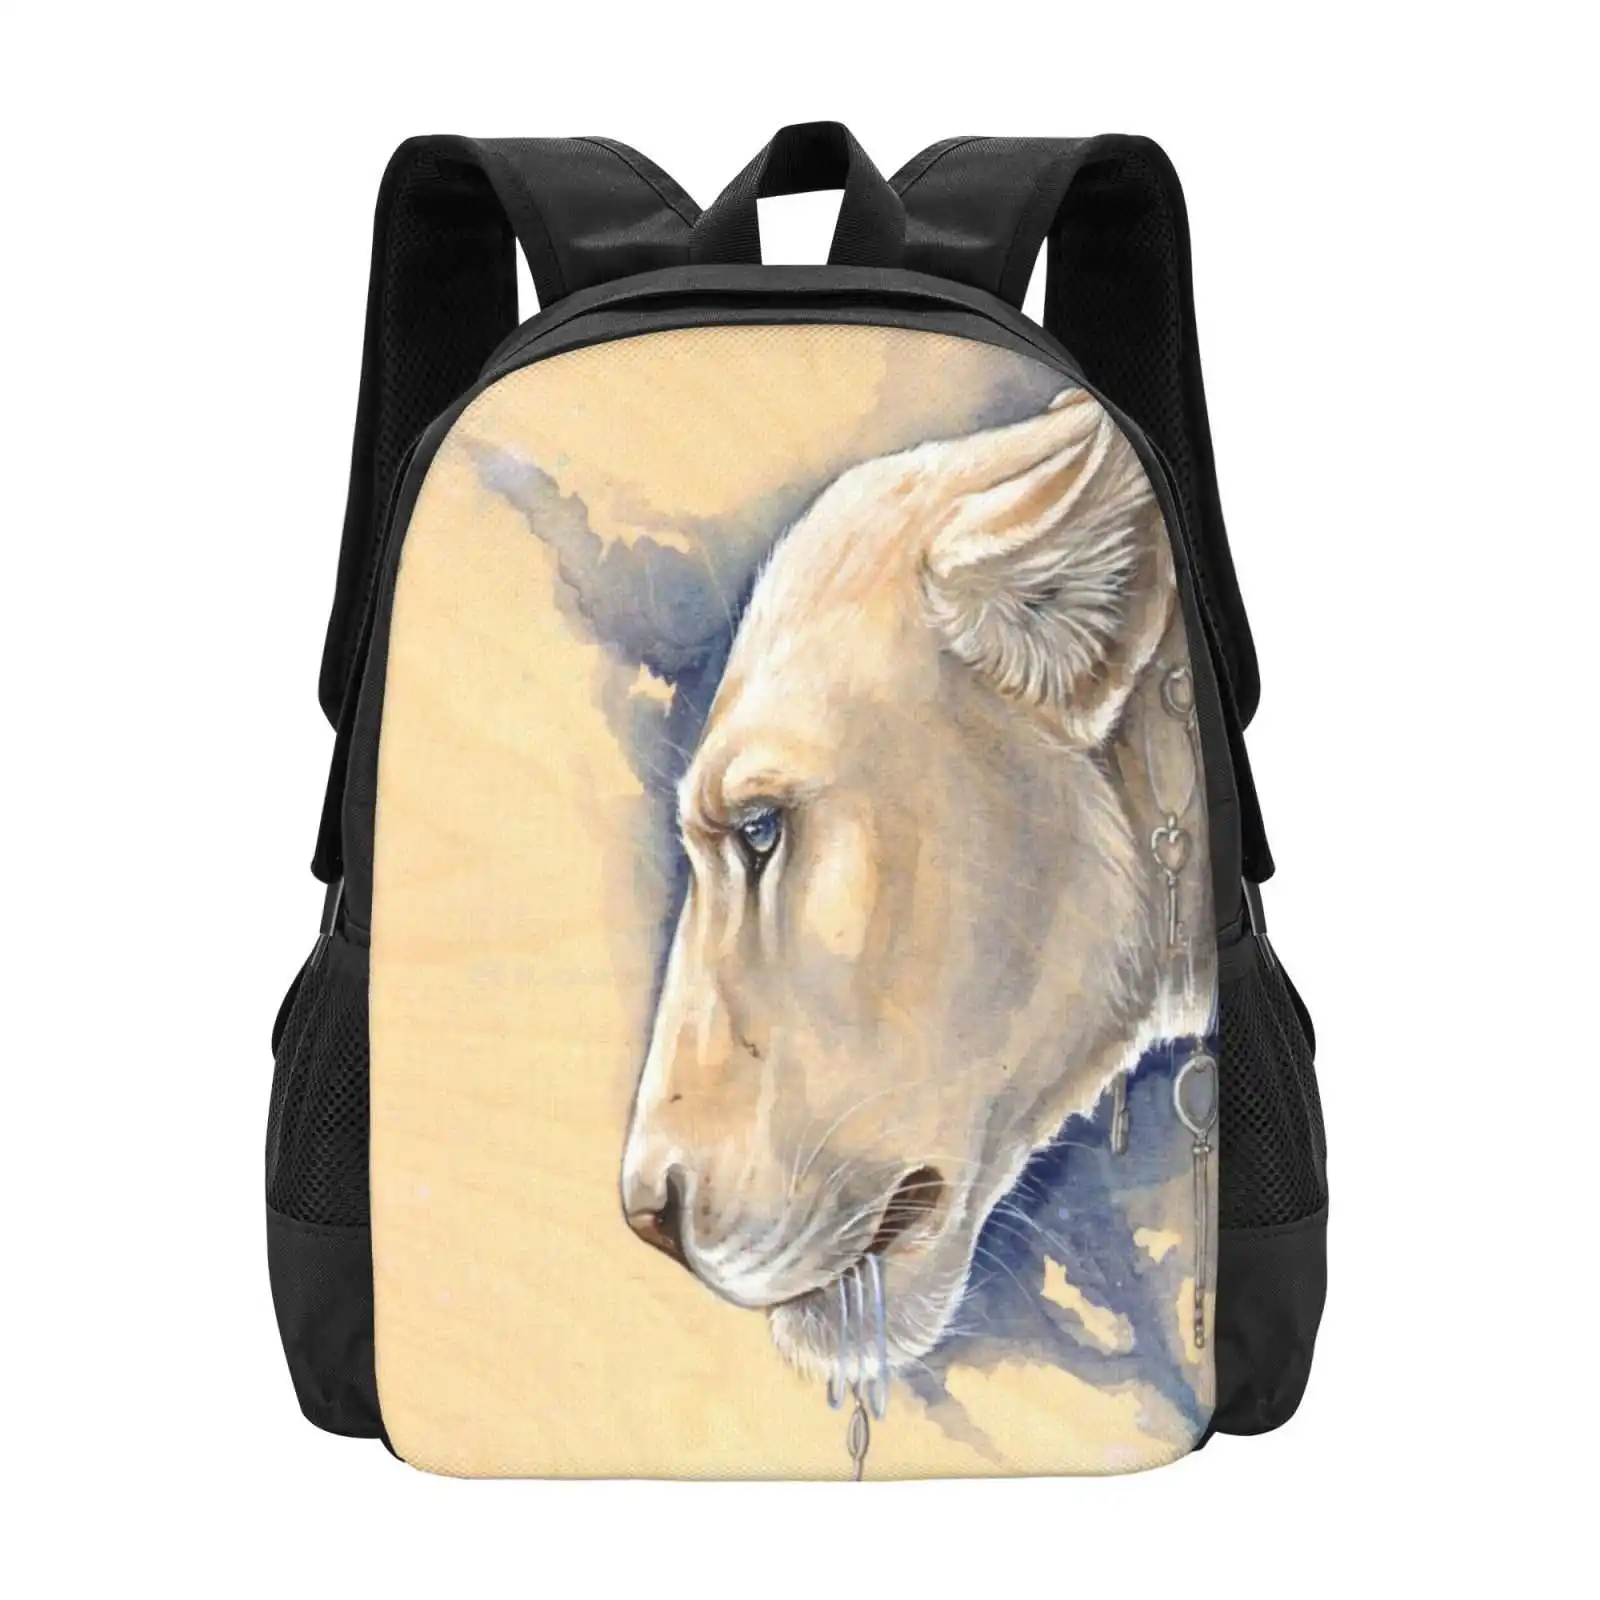 

Ether Backpacks For School Teenagers Girls Travel Bags Lioness Keys Lions Loss Surreal Blue Fantasy Wood White Lion